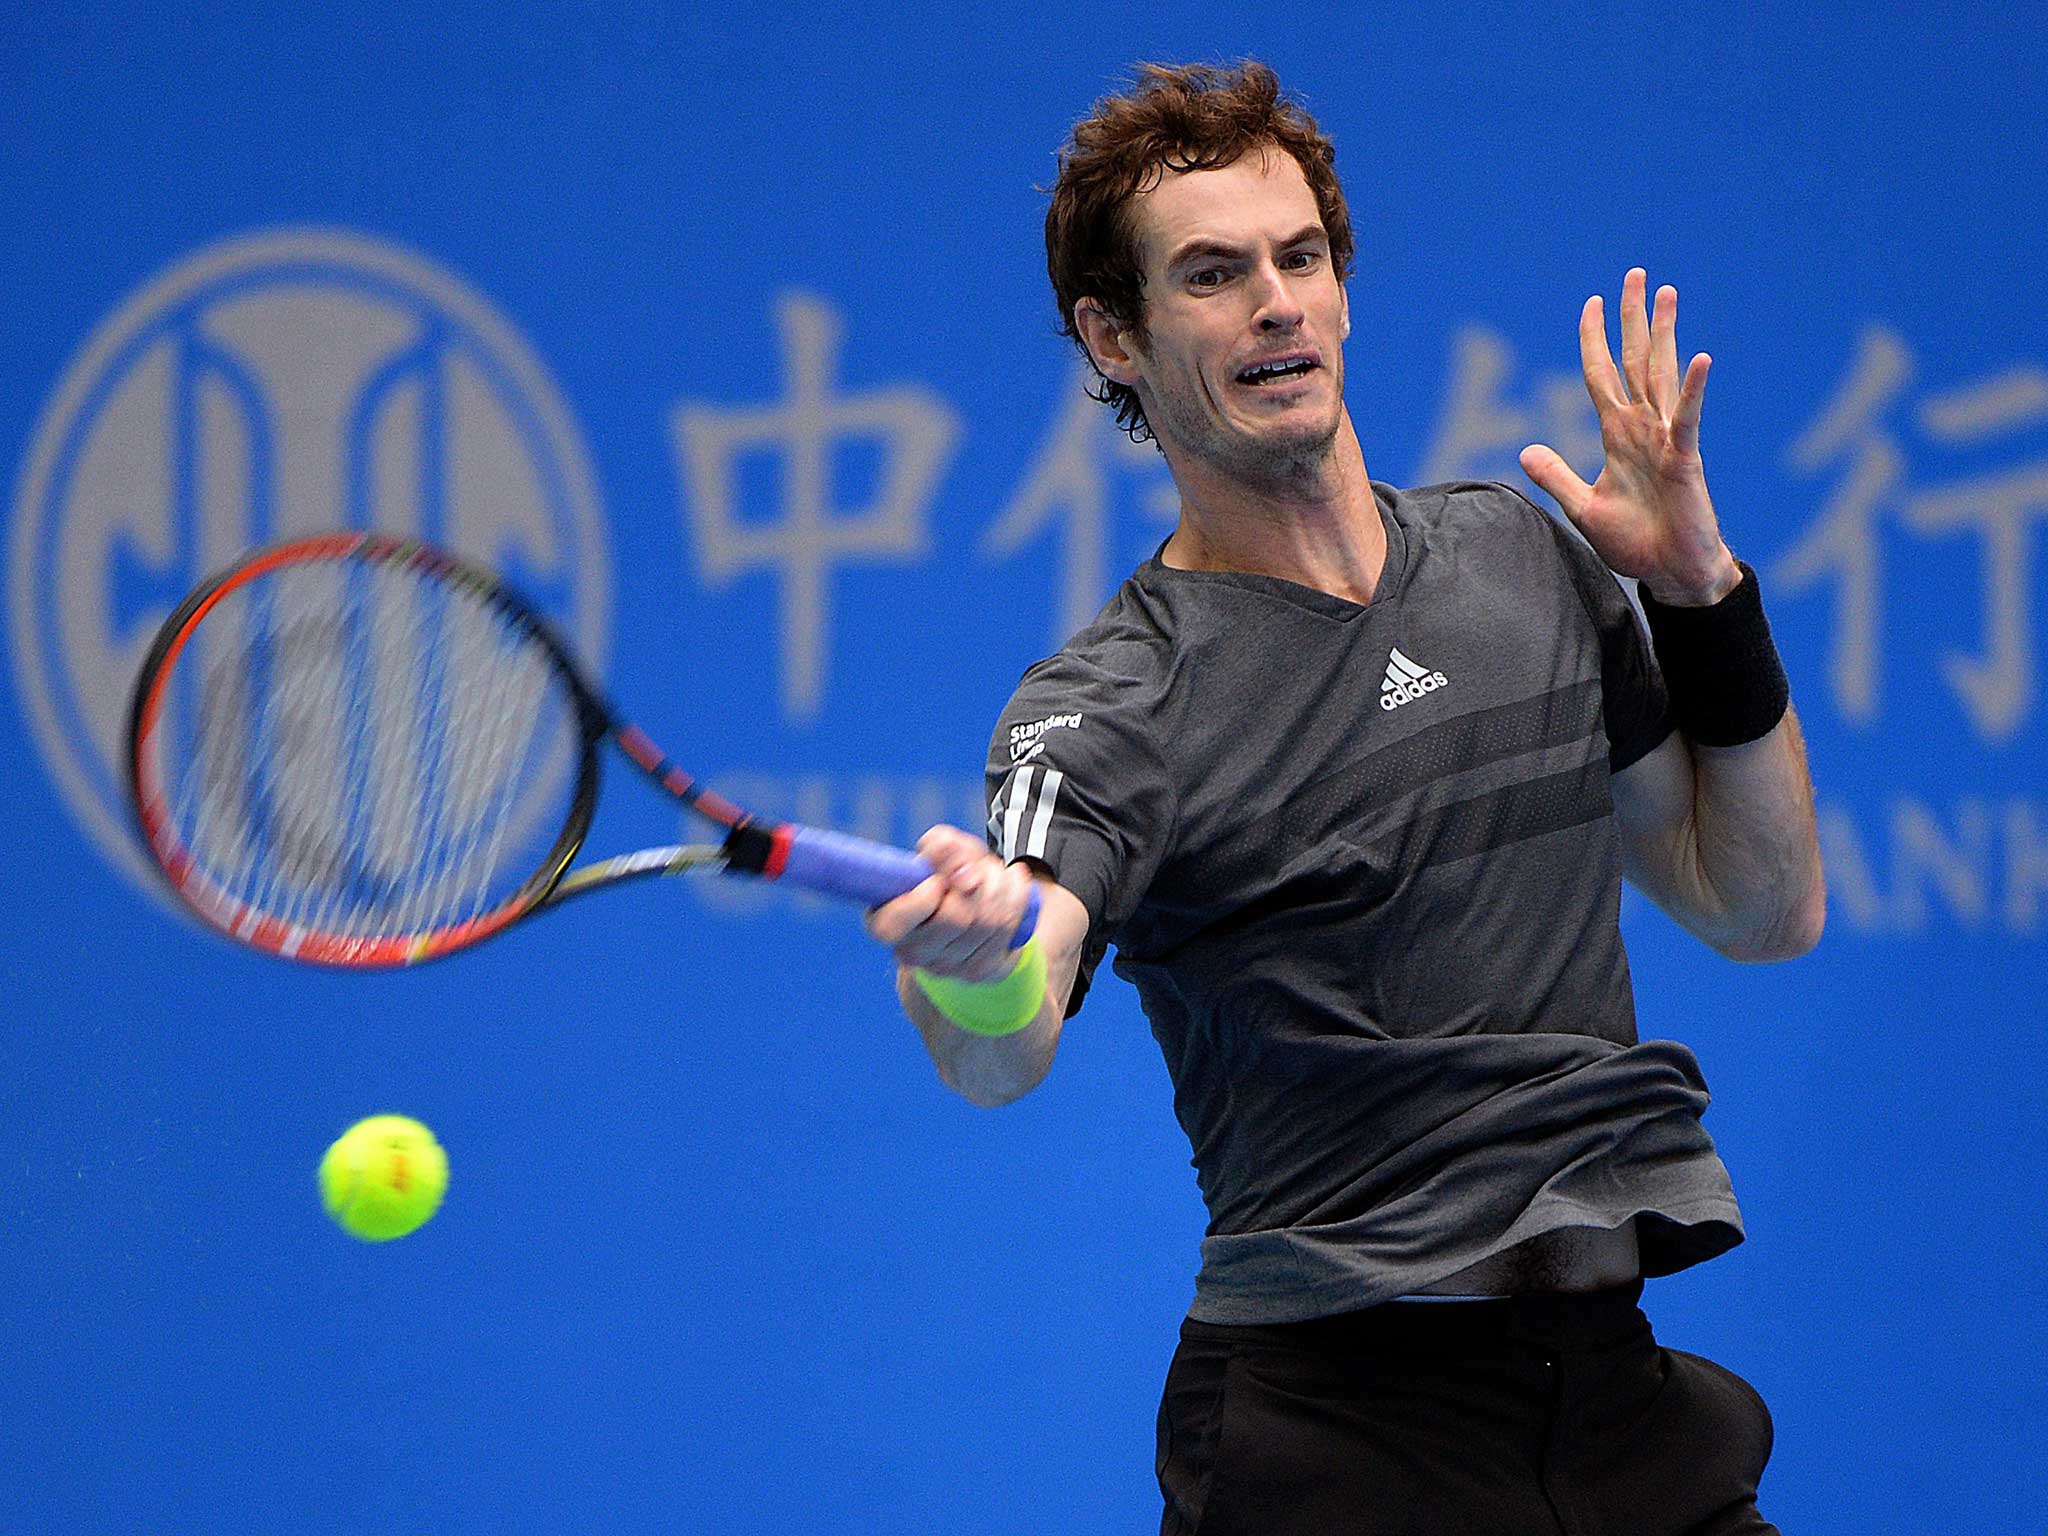 Andy Murray seeks to force his way back into the top eight in the rankings